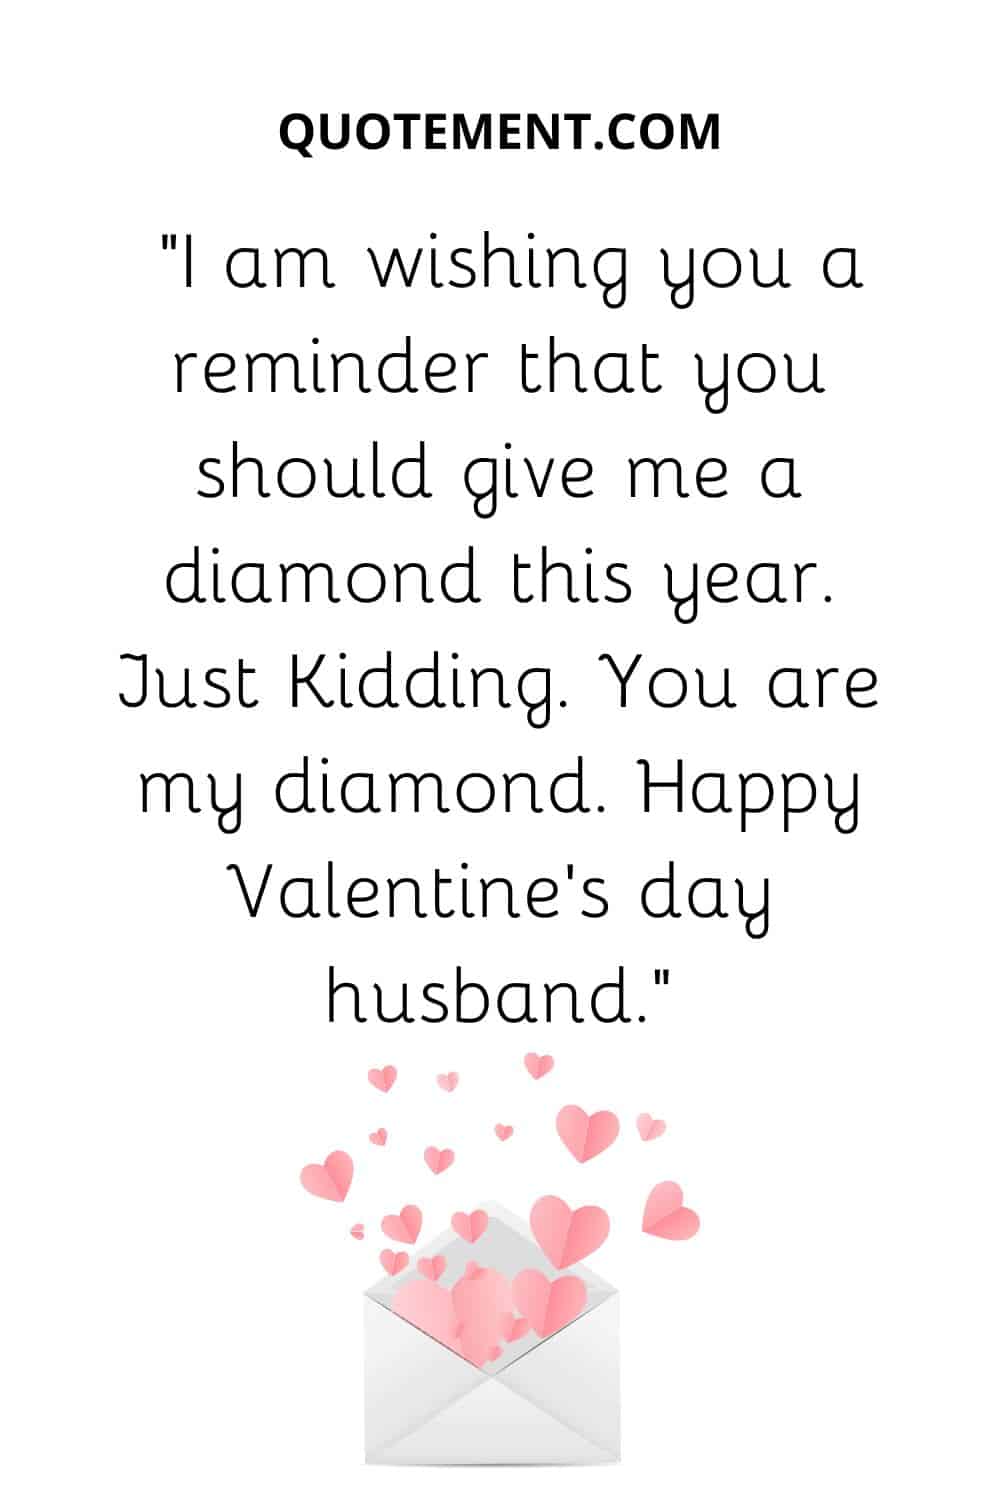 “I am wishing you a reminder that you should give me a diamond this year. Just Kidding. You are my diamond. Happy Valentine's day husband.”